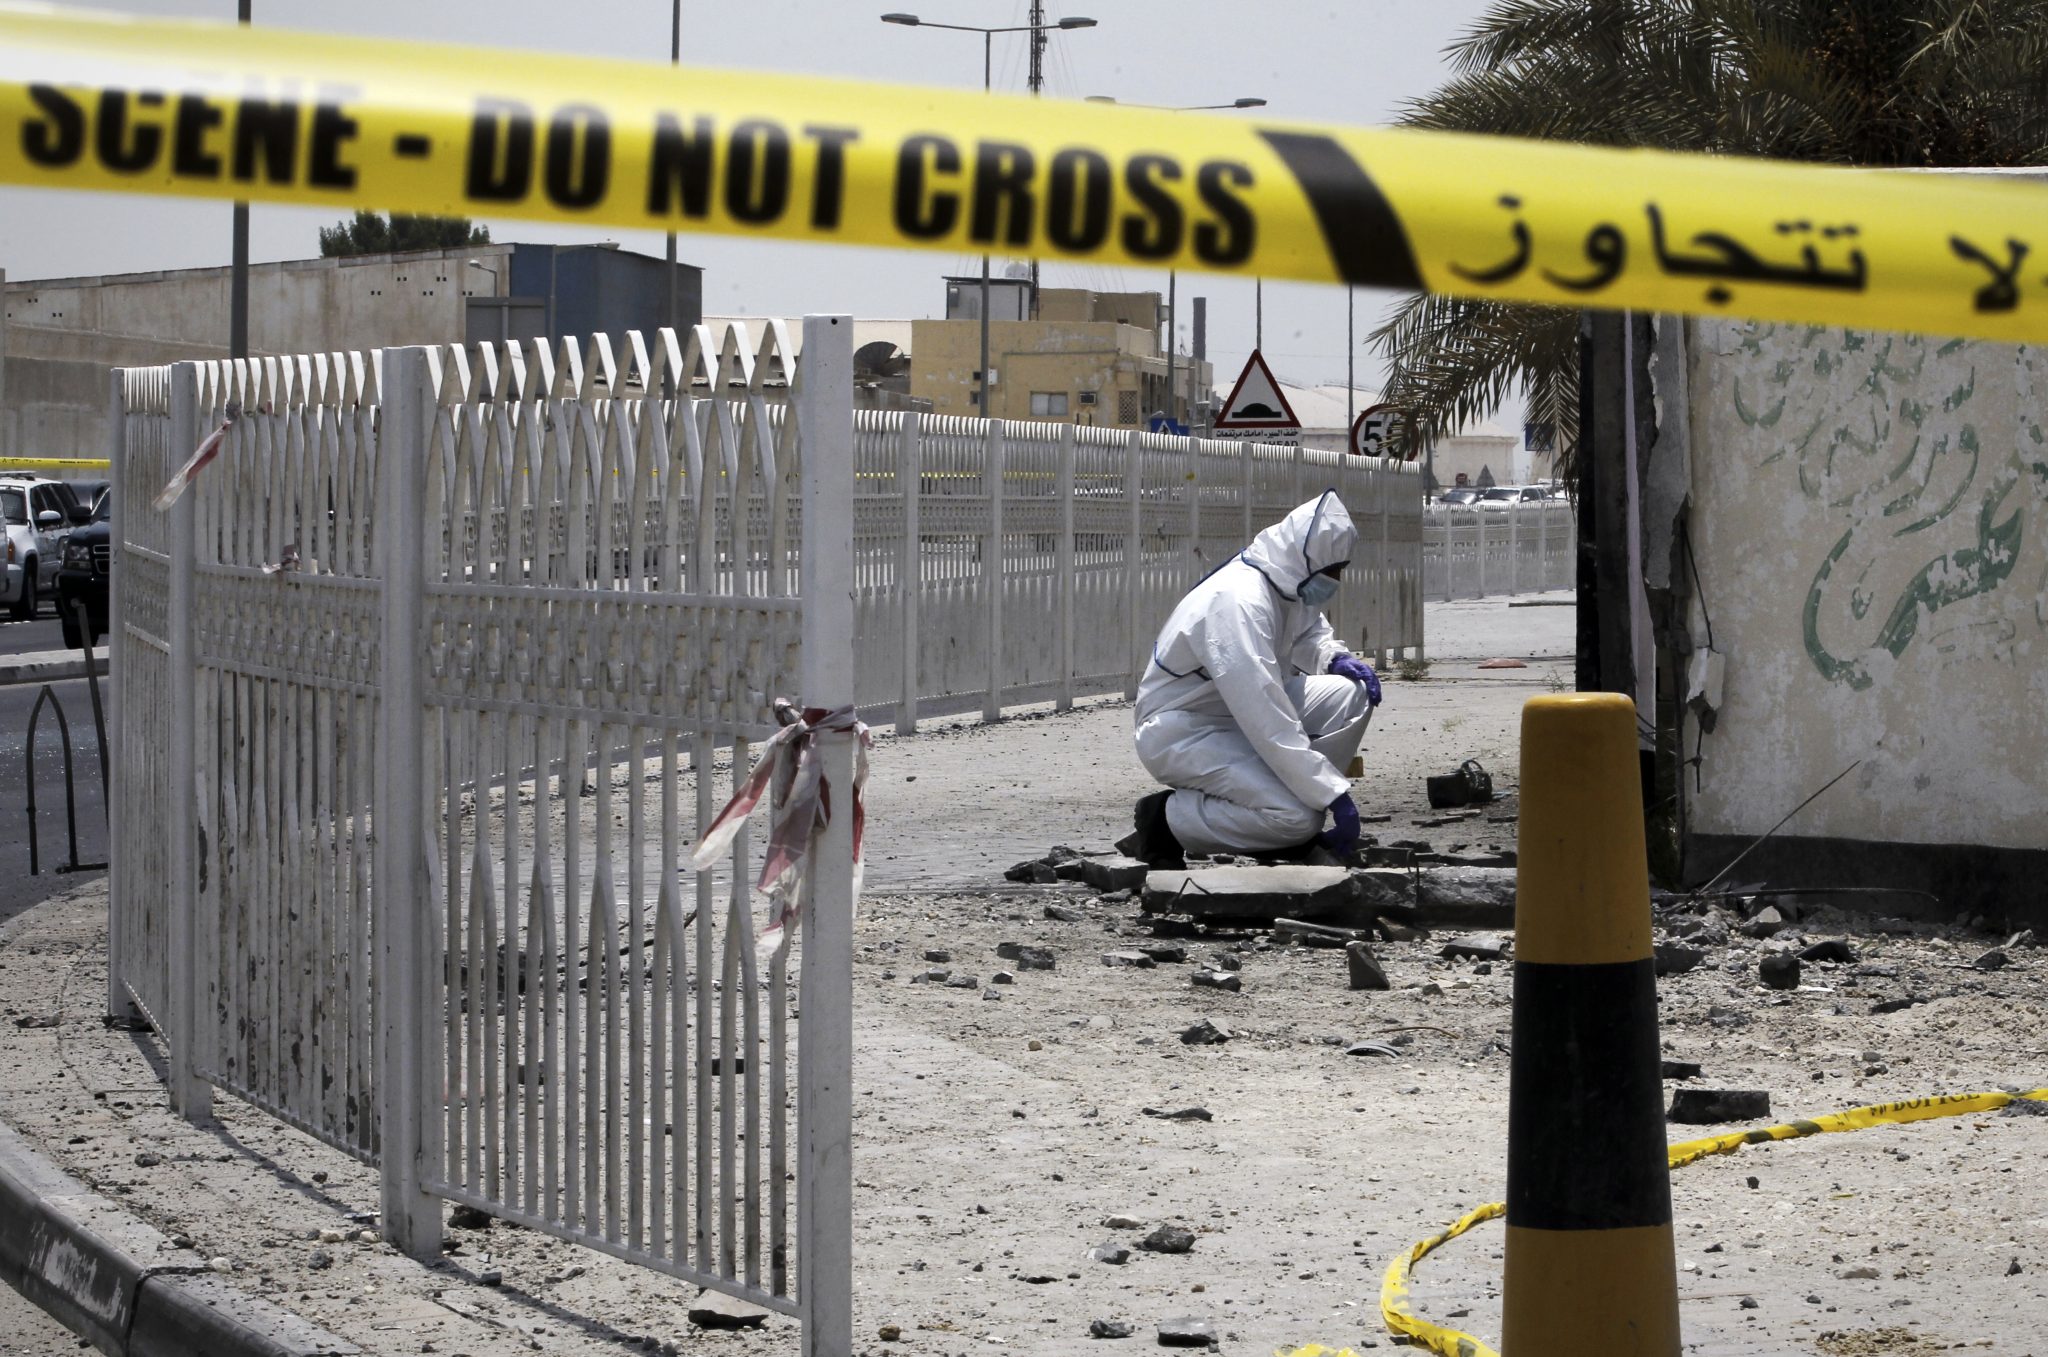 A Bahraini forensic police officer inspects the site of a bomb blast in the village of Sitra, south of Manama, on July 28, 2015. The blast killed two Bahraini policemen and wounded six others in an area often shaken by clashes between security forces and Shiite Muslim protesters, according to the interior ministry. Bahrain has seen frequent unrest since the minority Sunni rulers of the small Gulf kingdom crushed a Shiite-led uprising four years ago. AFP PHOTO / MOHAMMED AL-SHAIKH / AFP PHOTO / MOHAMMED AL-SHAIKH